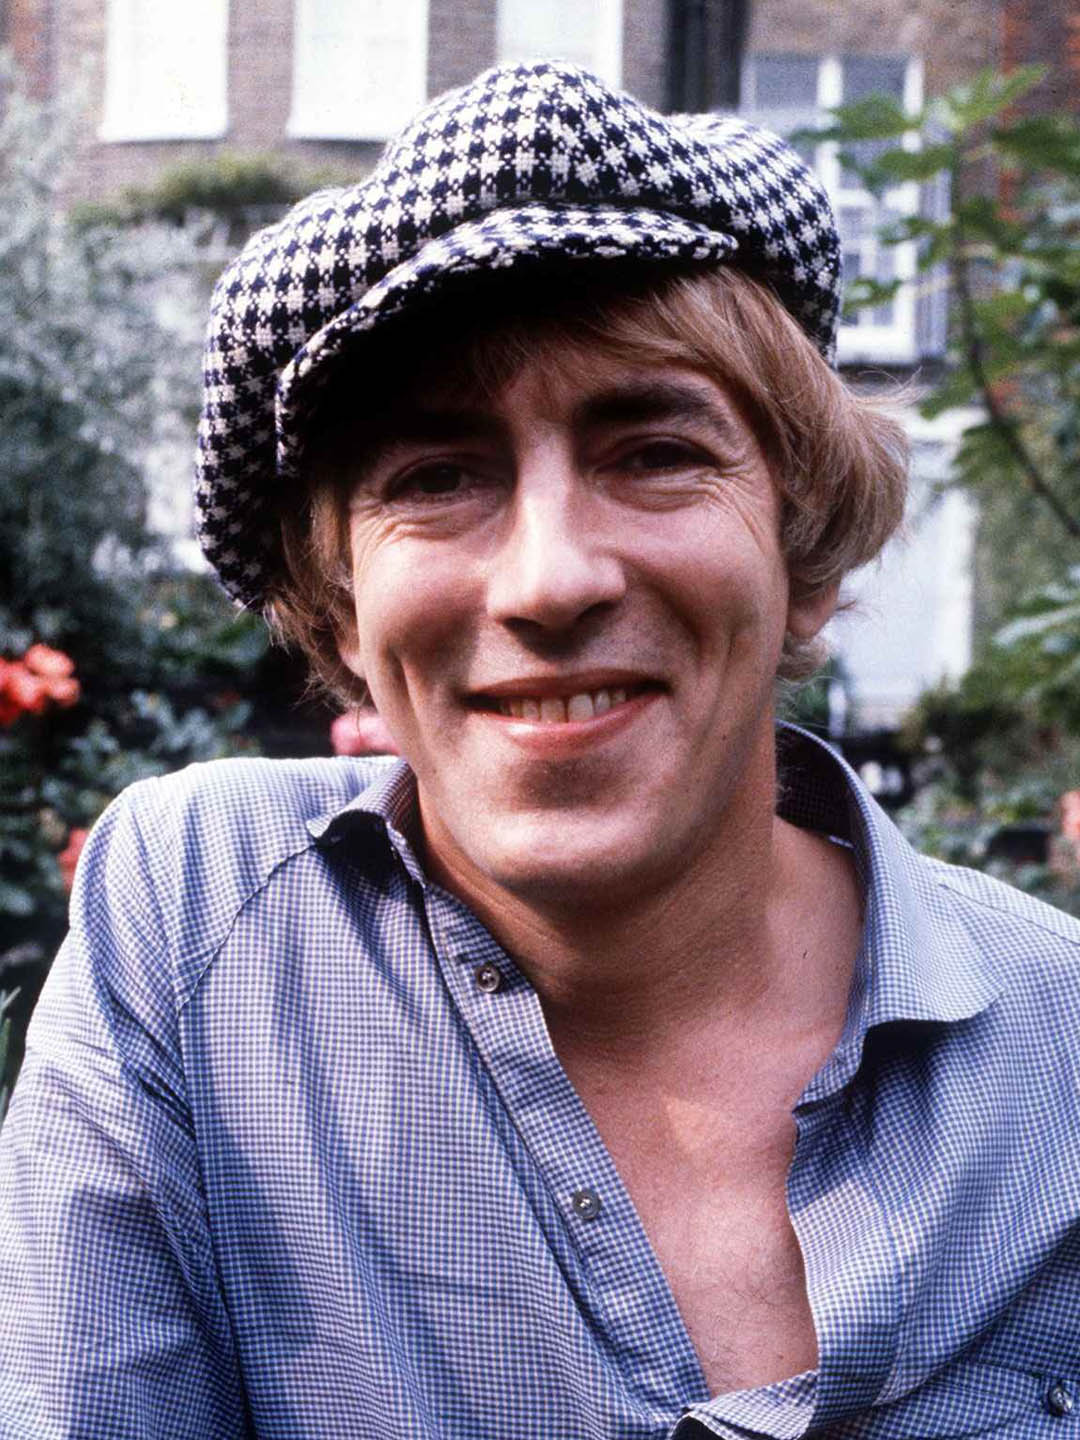 How tall is Peter Cook?